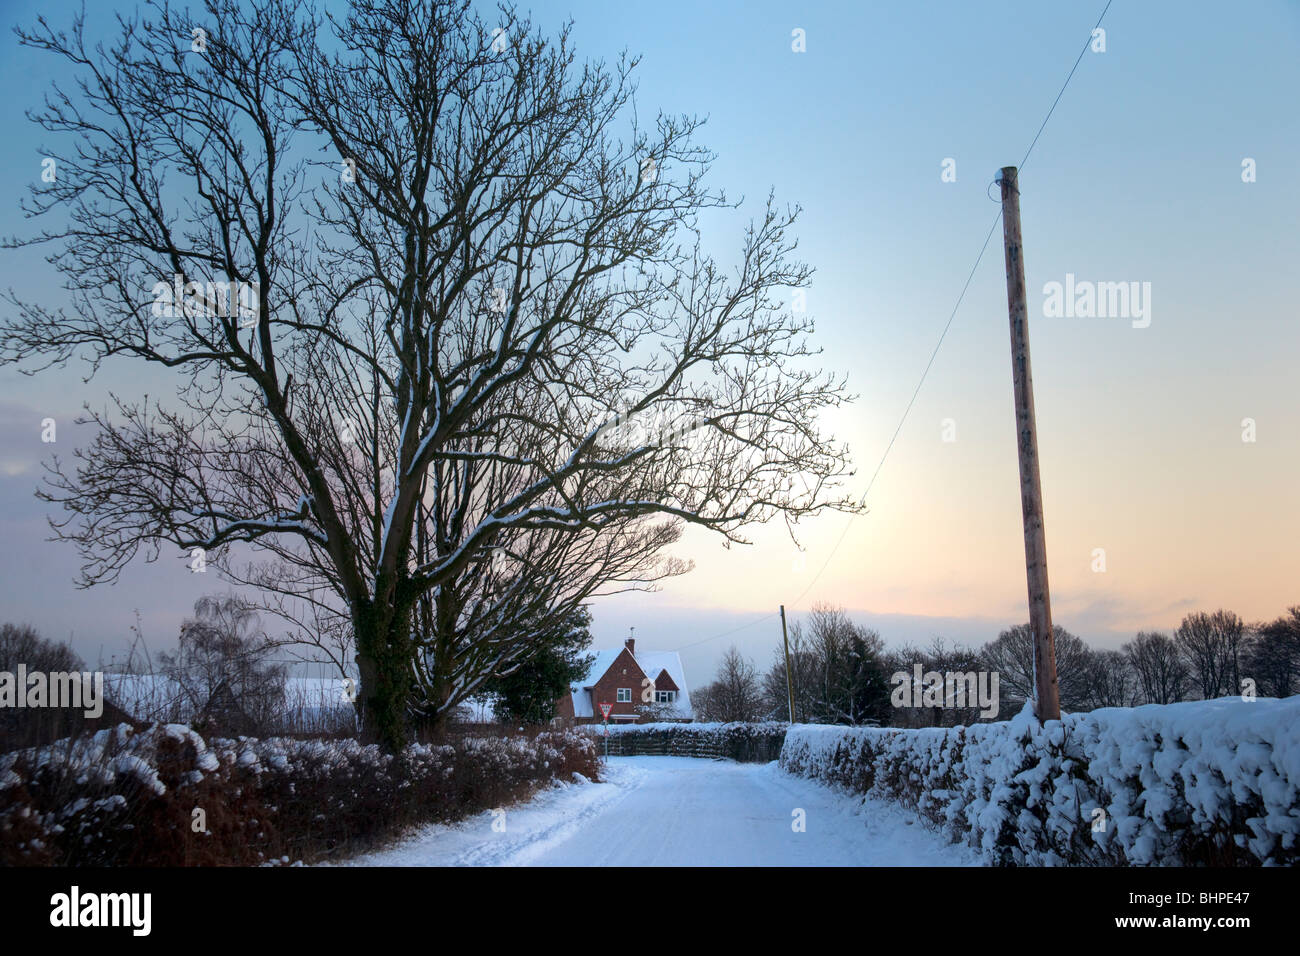 Winter evening in a country lane, Prestwood, Buckinghamshire, Chilterns, UK Stock Photo